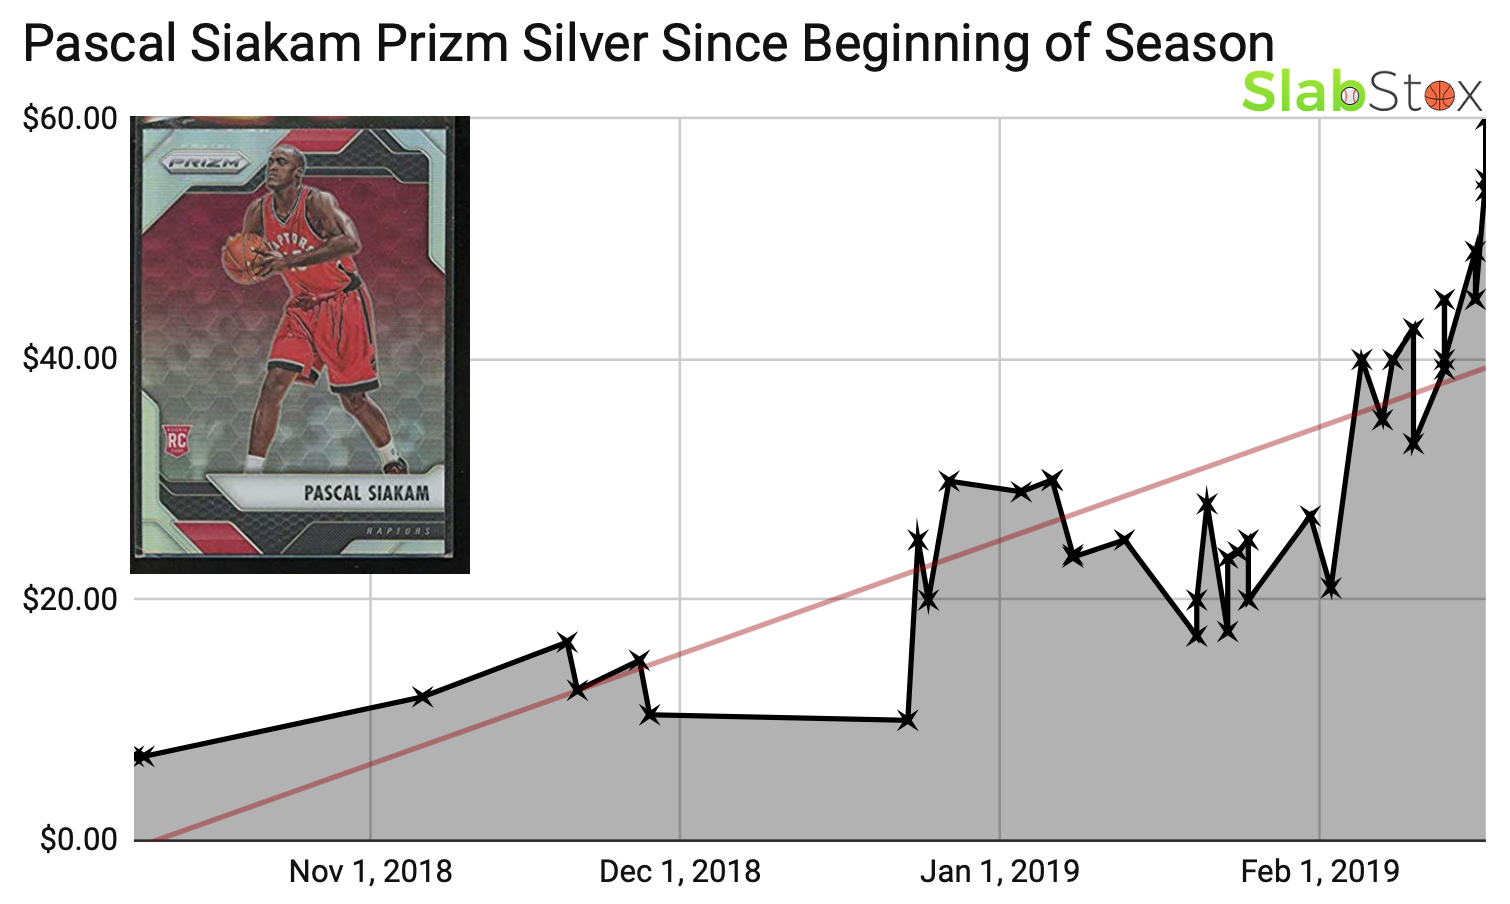 Slabstox infographic for Pascal Siakam Prizm Silver since beginning of season